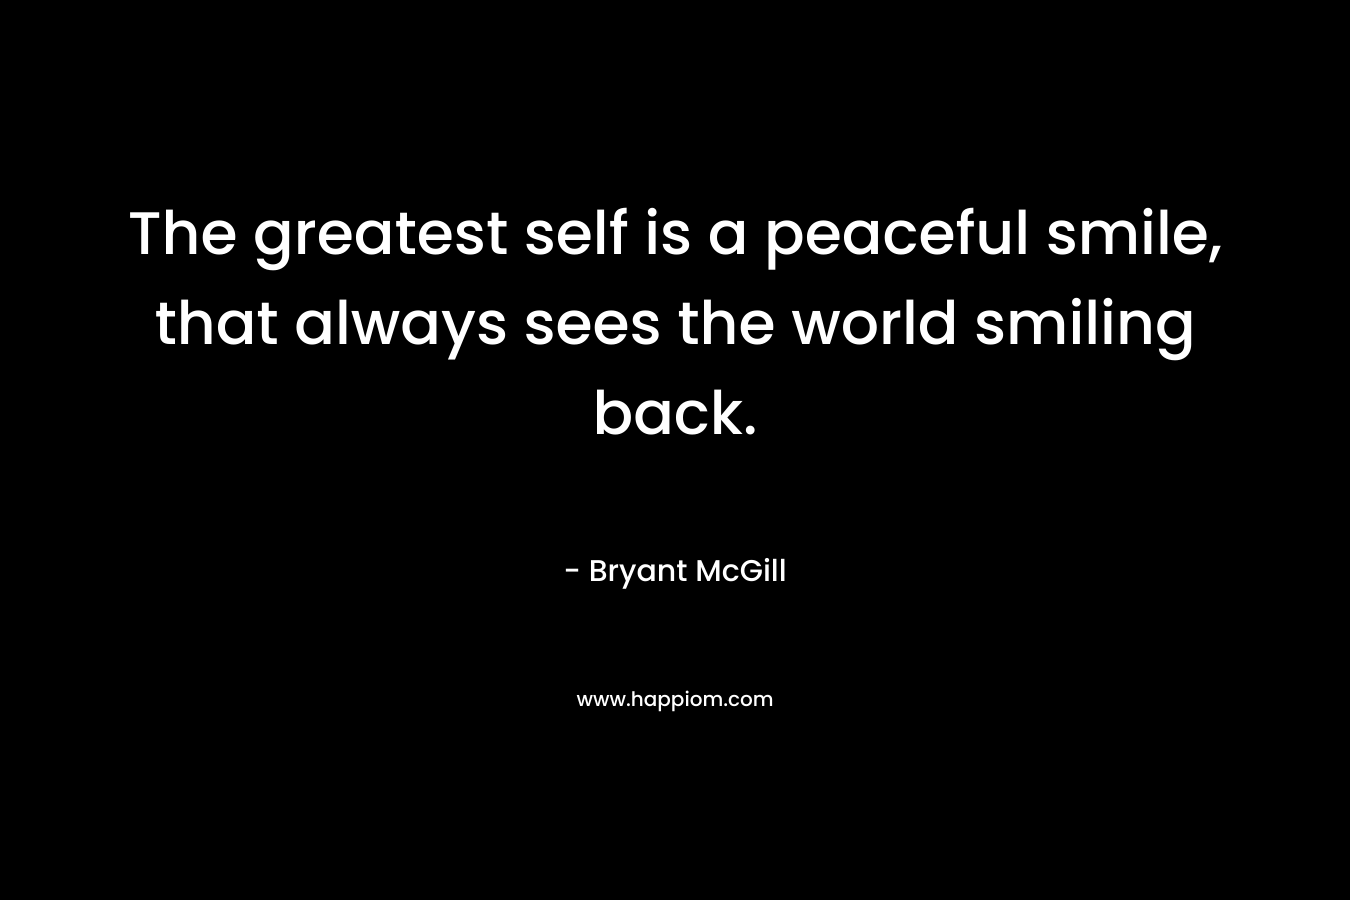 The greatest self is a peaceful smile, that always sees the world smiling back.